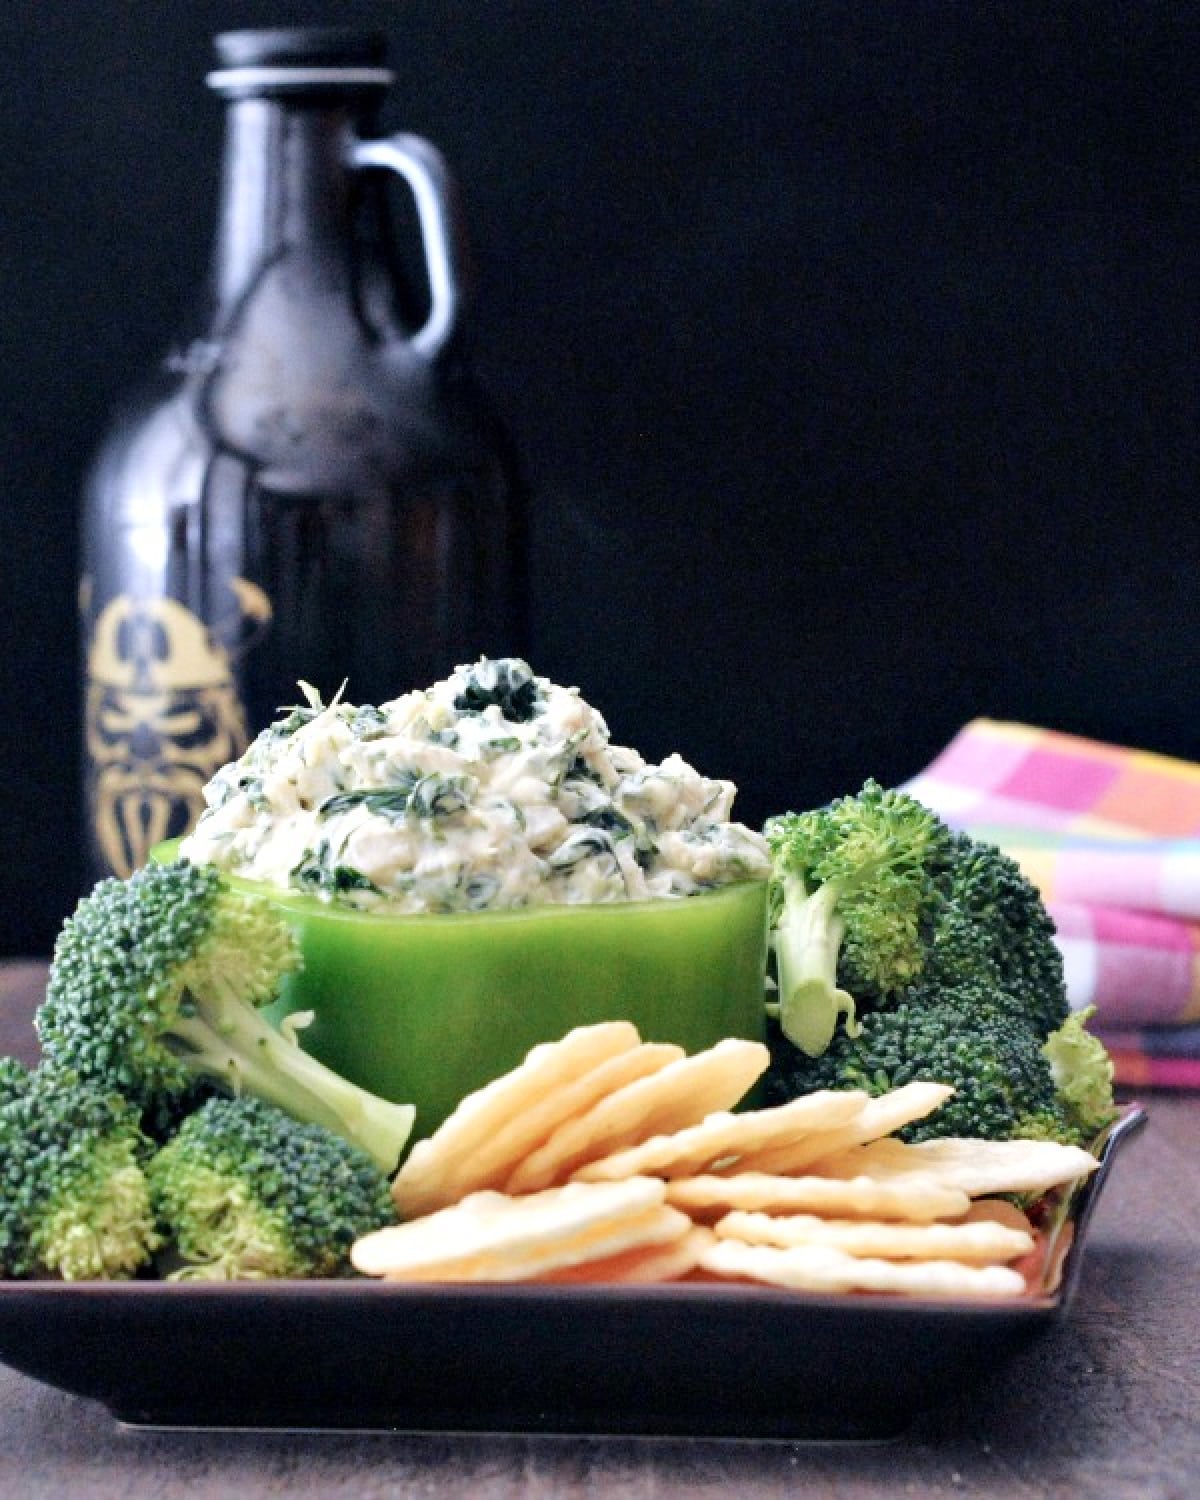 Spinach dip served in a hollowed out green bell pepper, with fresh broccoli trees and rice crackers for dipping.